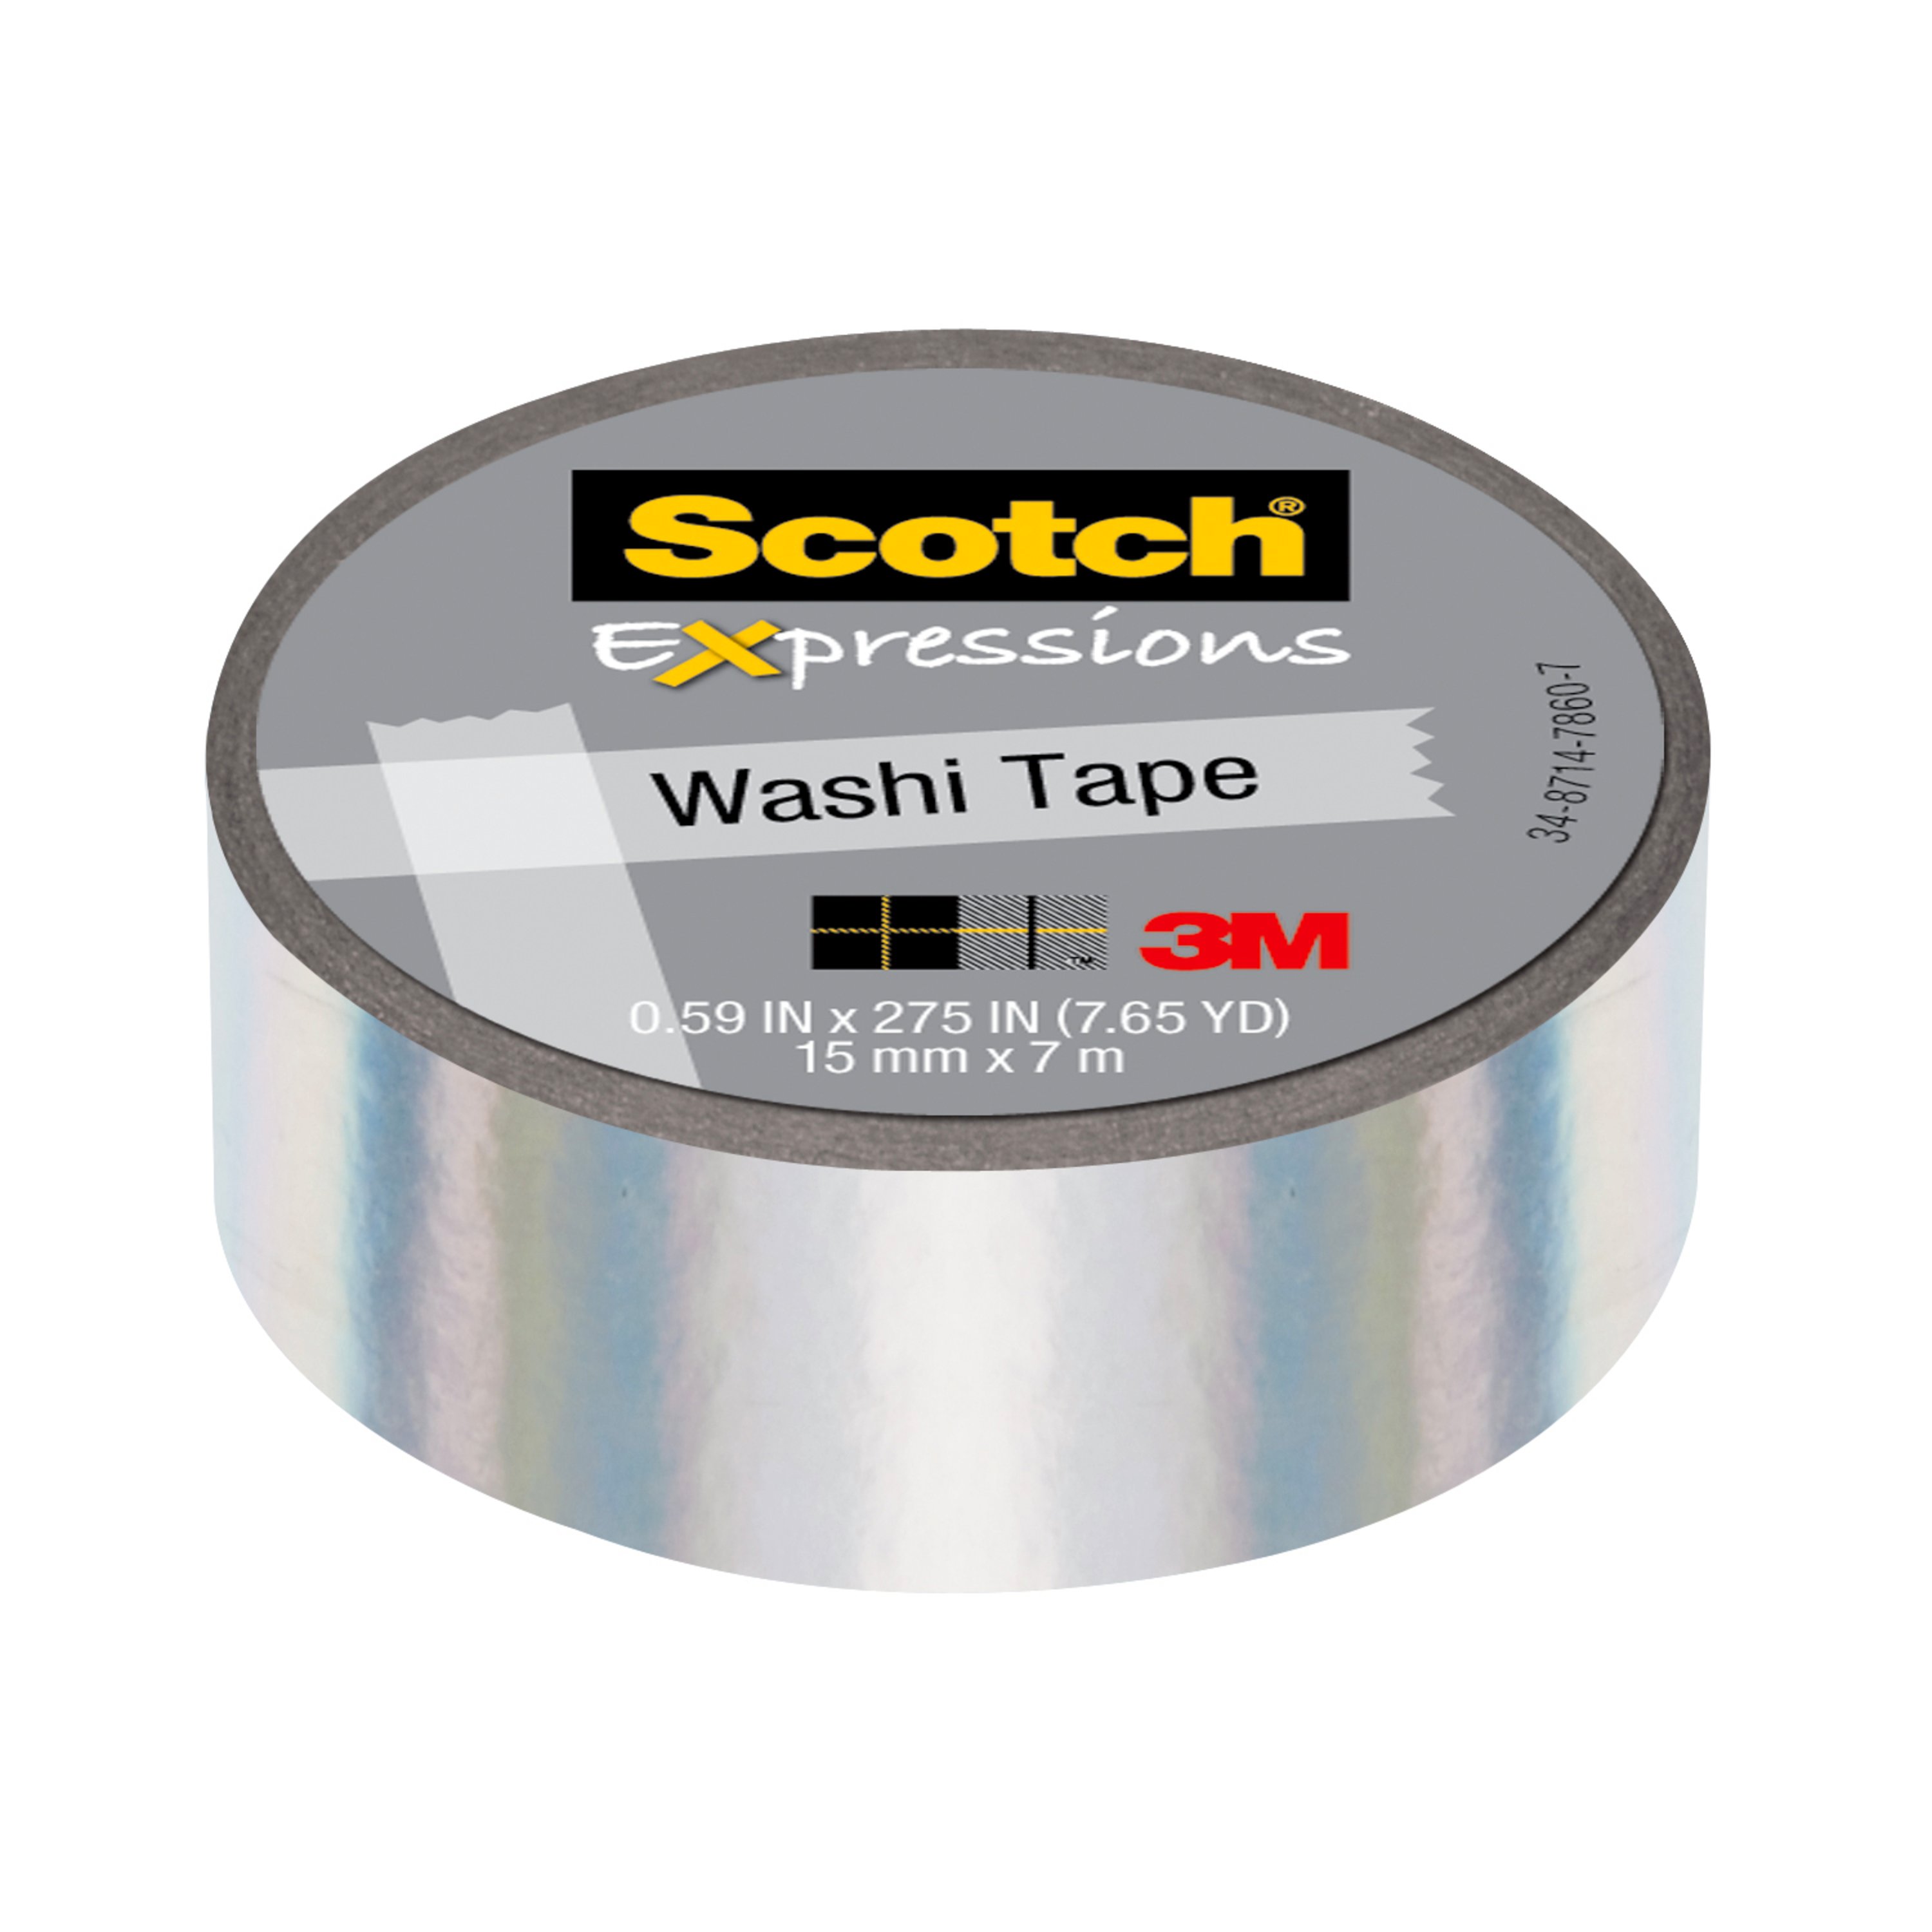 Scotch® Expressions Washi Tape, 0.59 in x 275 in, Iridescent White - image 1 of 5